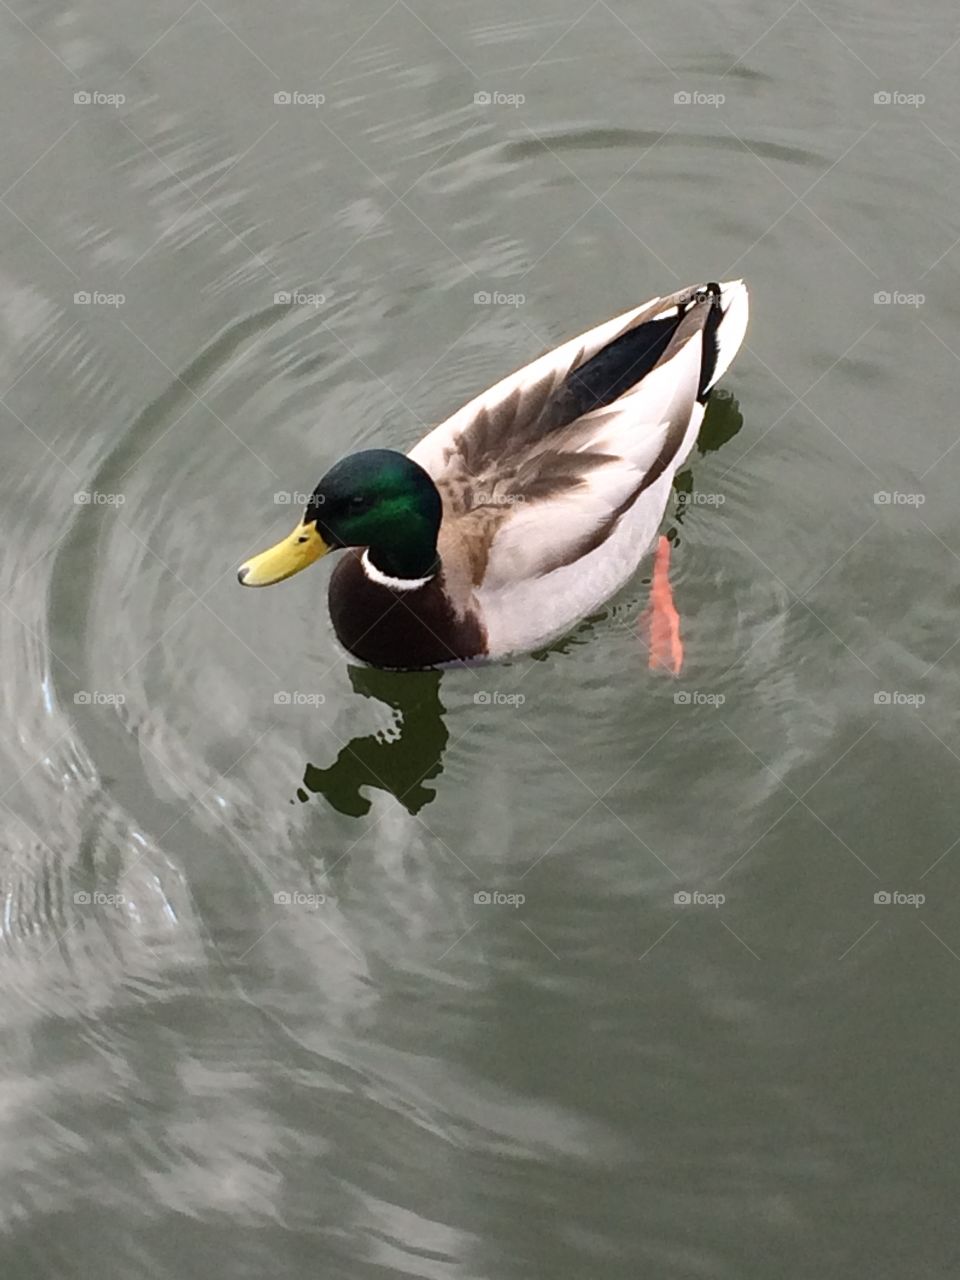 Beautiful duck looking for food floating down the Humber river. Cute little guy saw me and brought his wife to get food. 